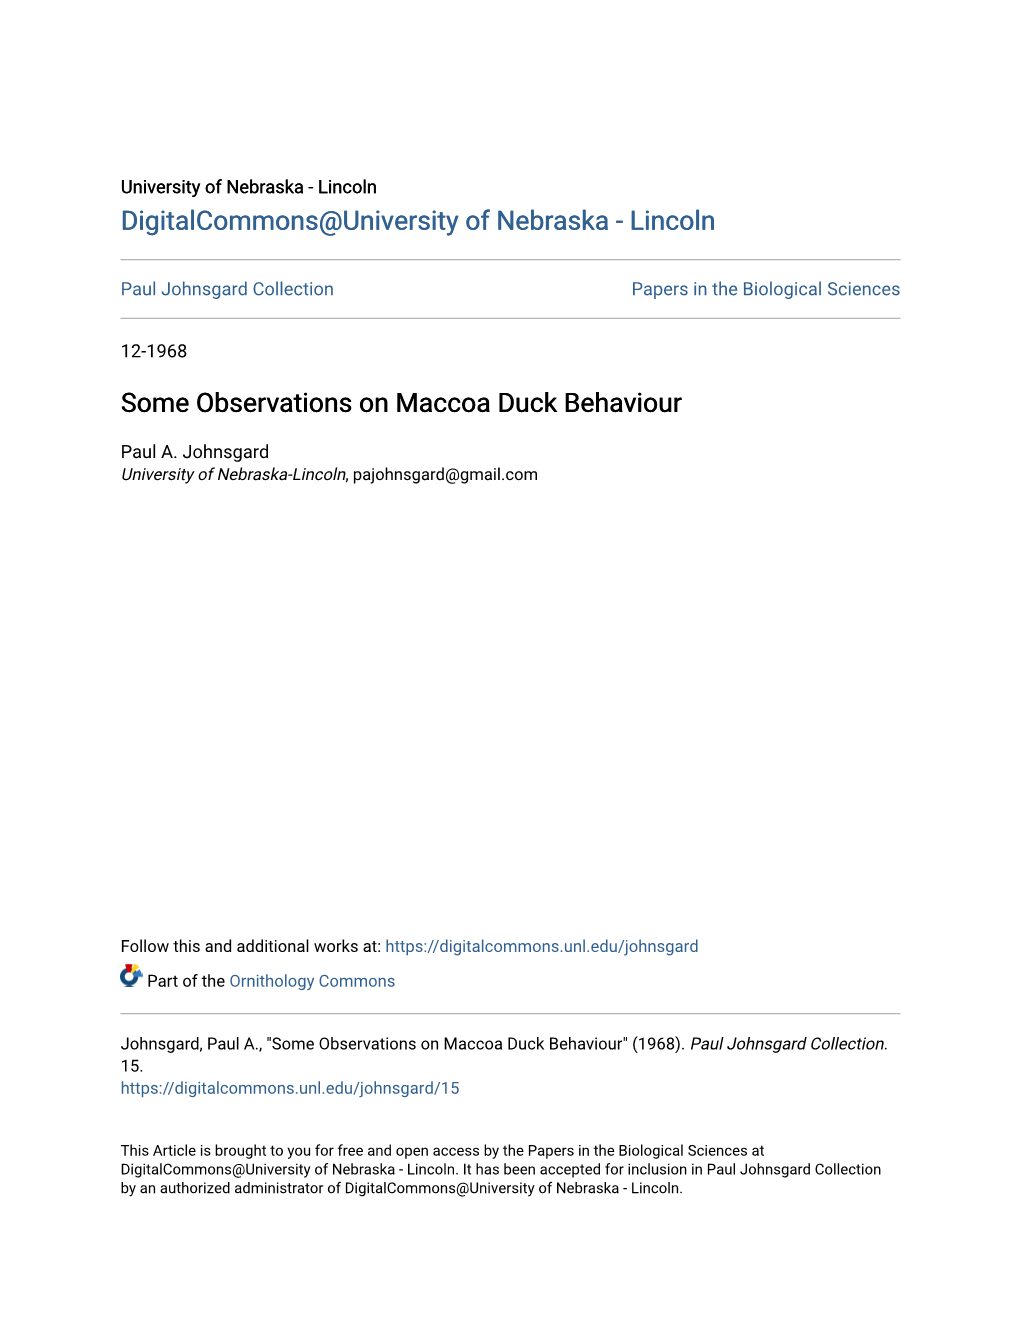 Some Observations on Maccoa Duck Behaviour